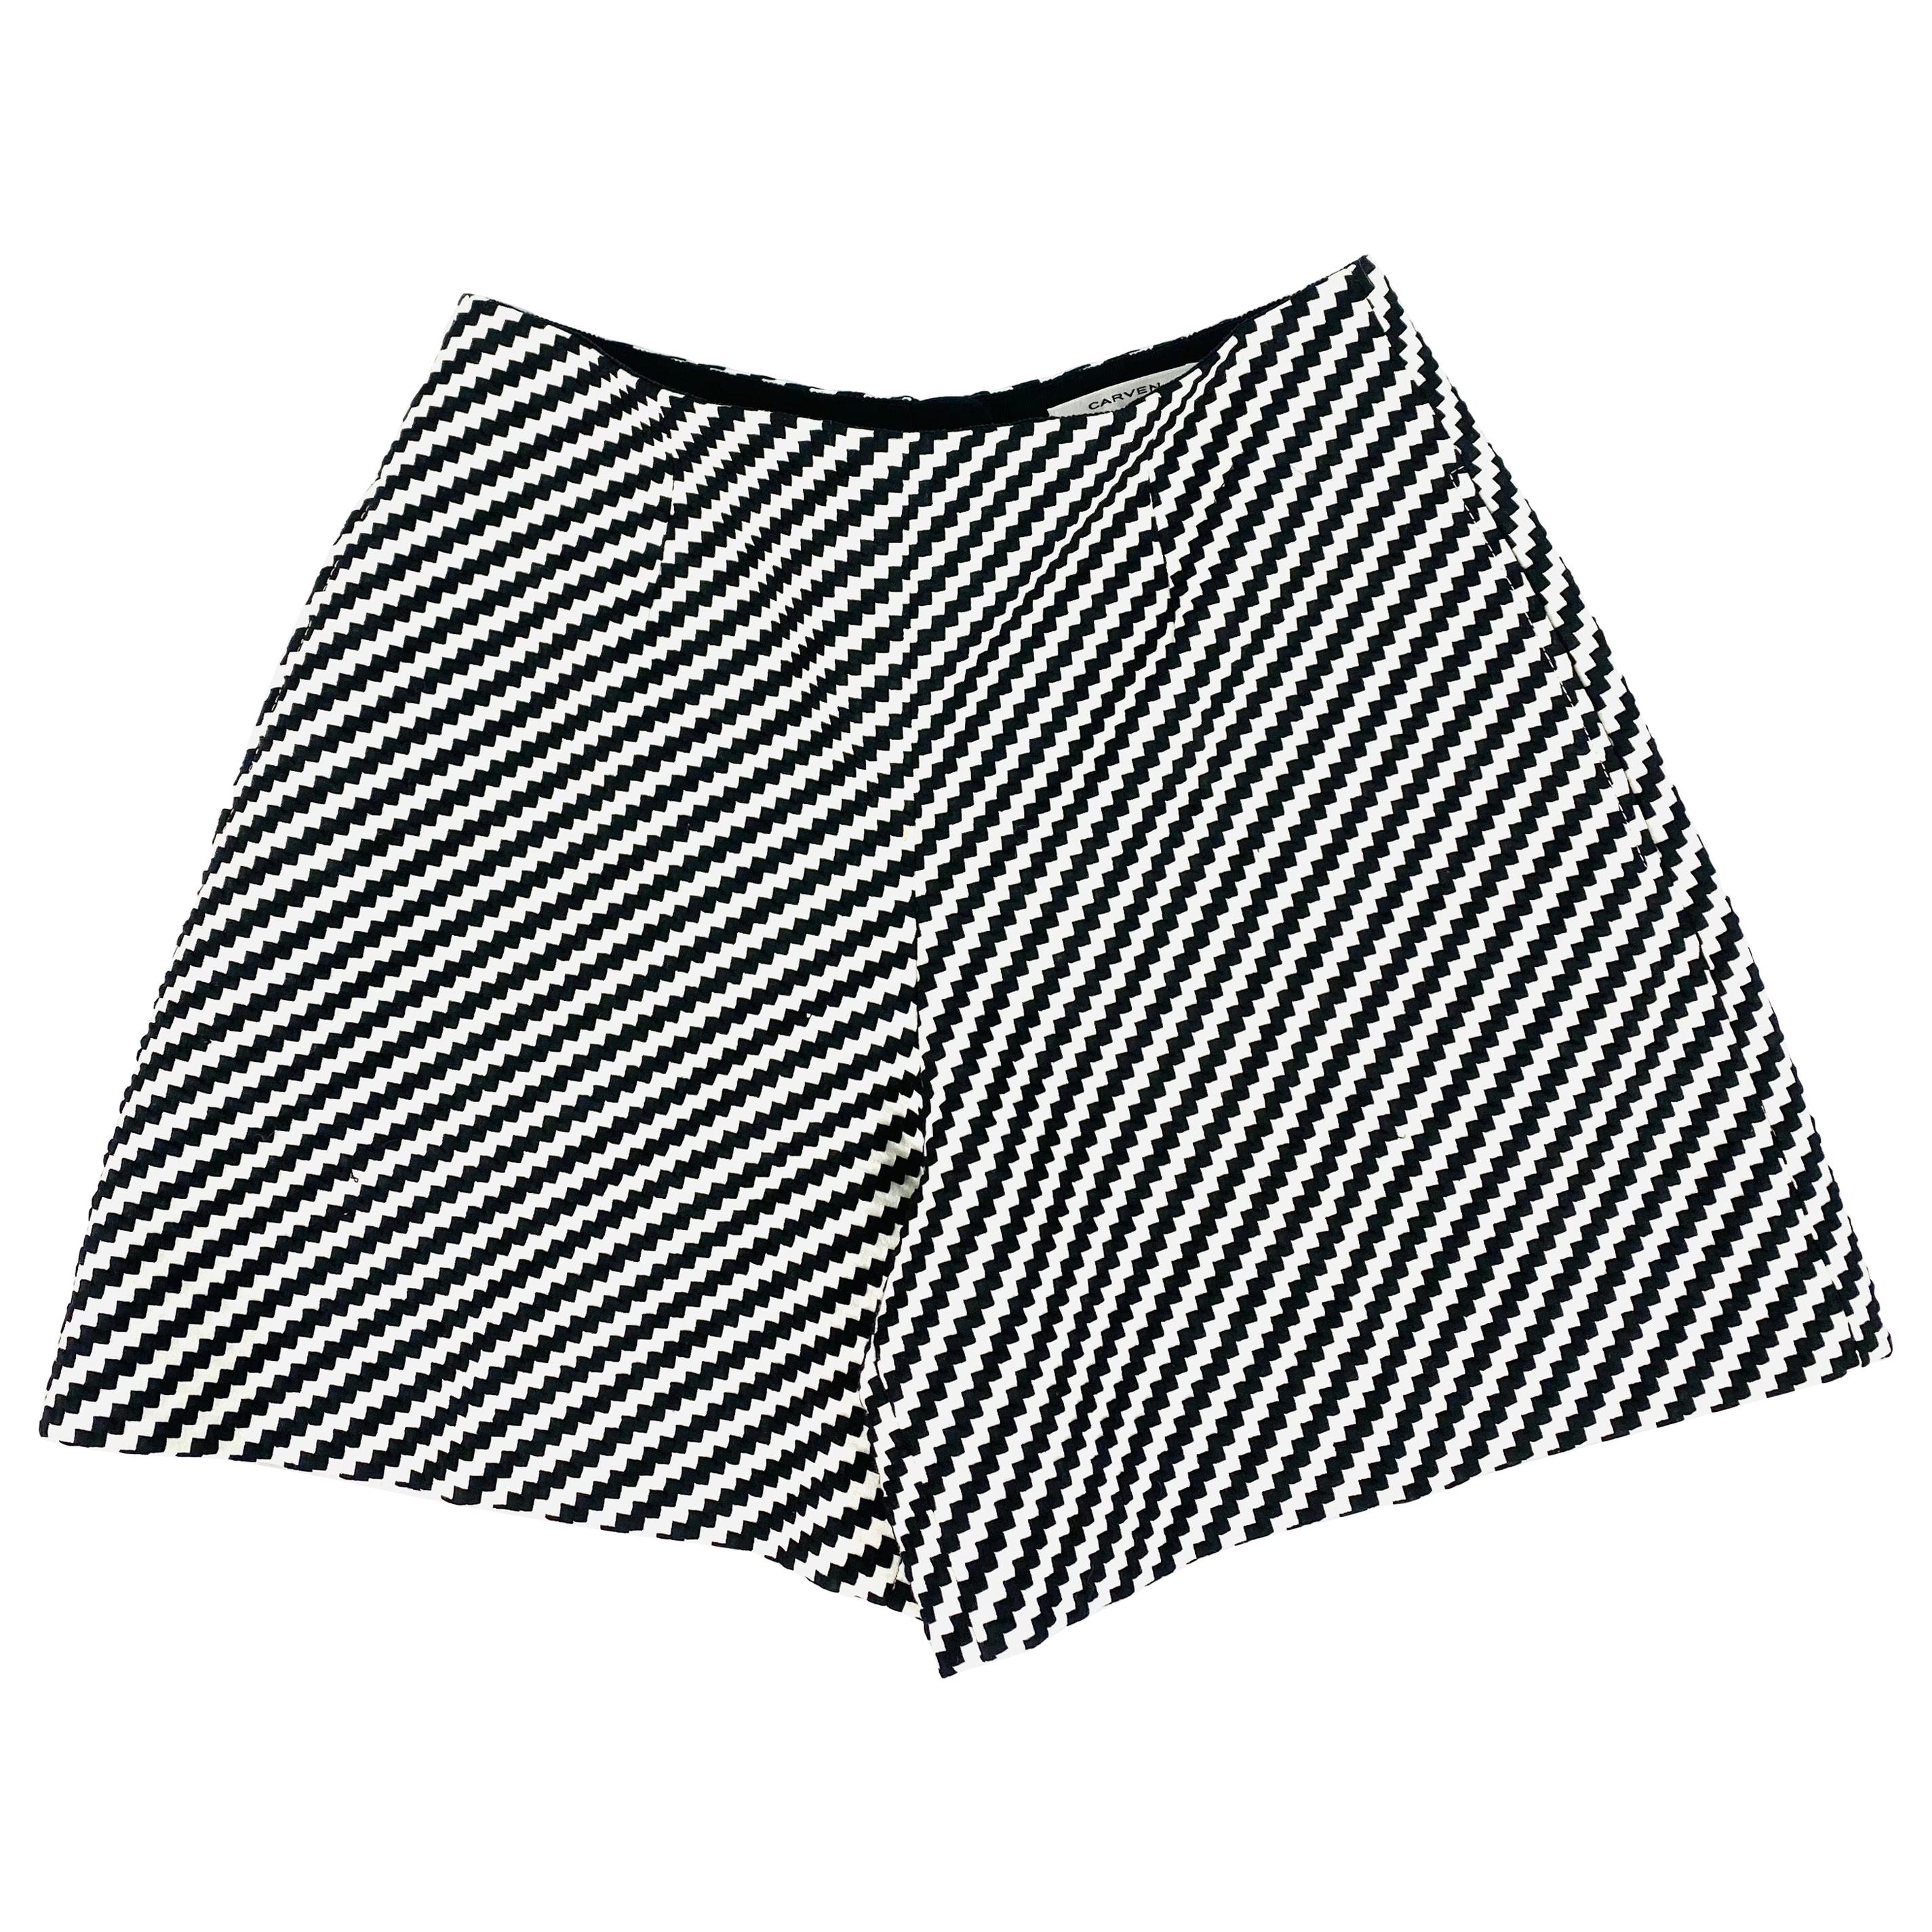 Carven Black and White Shorts, Size 38